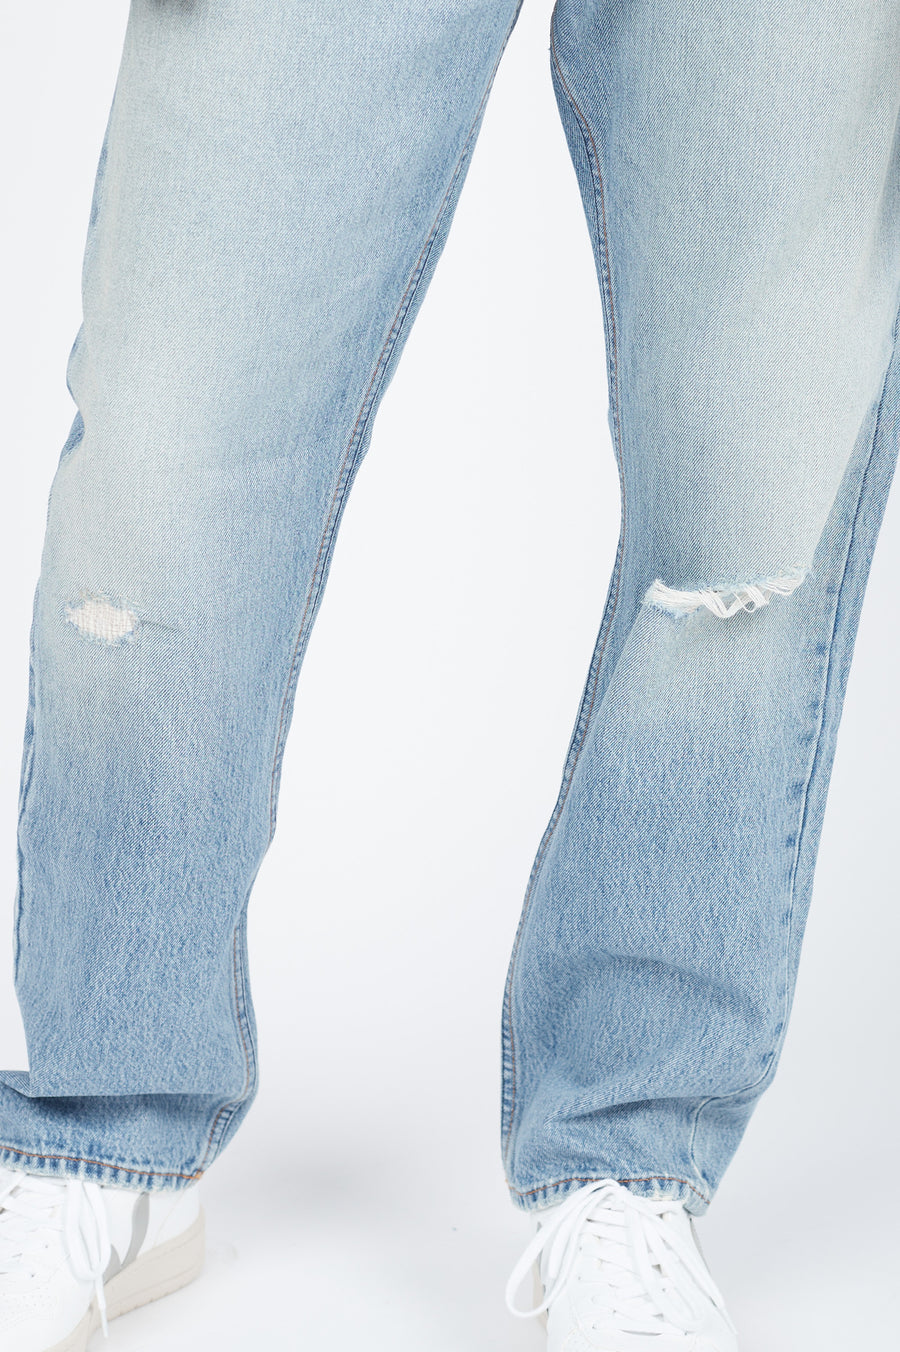 Dash Straight Jeans - Stone Cast Rip Decay